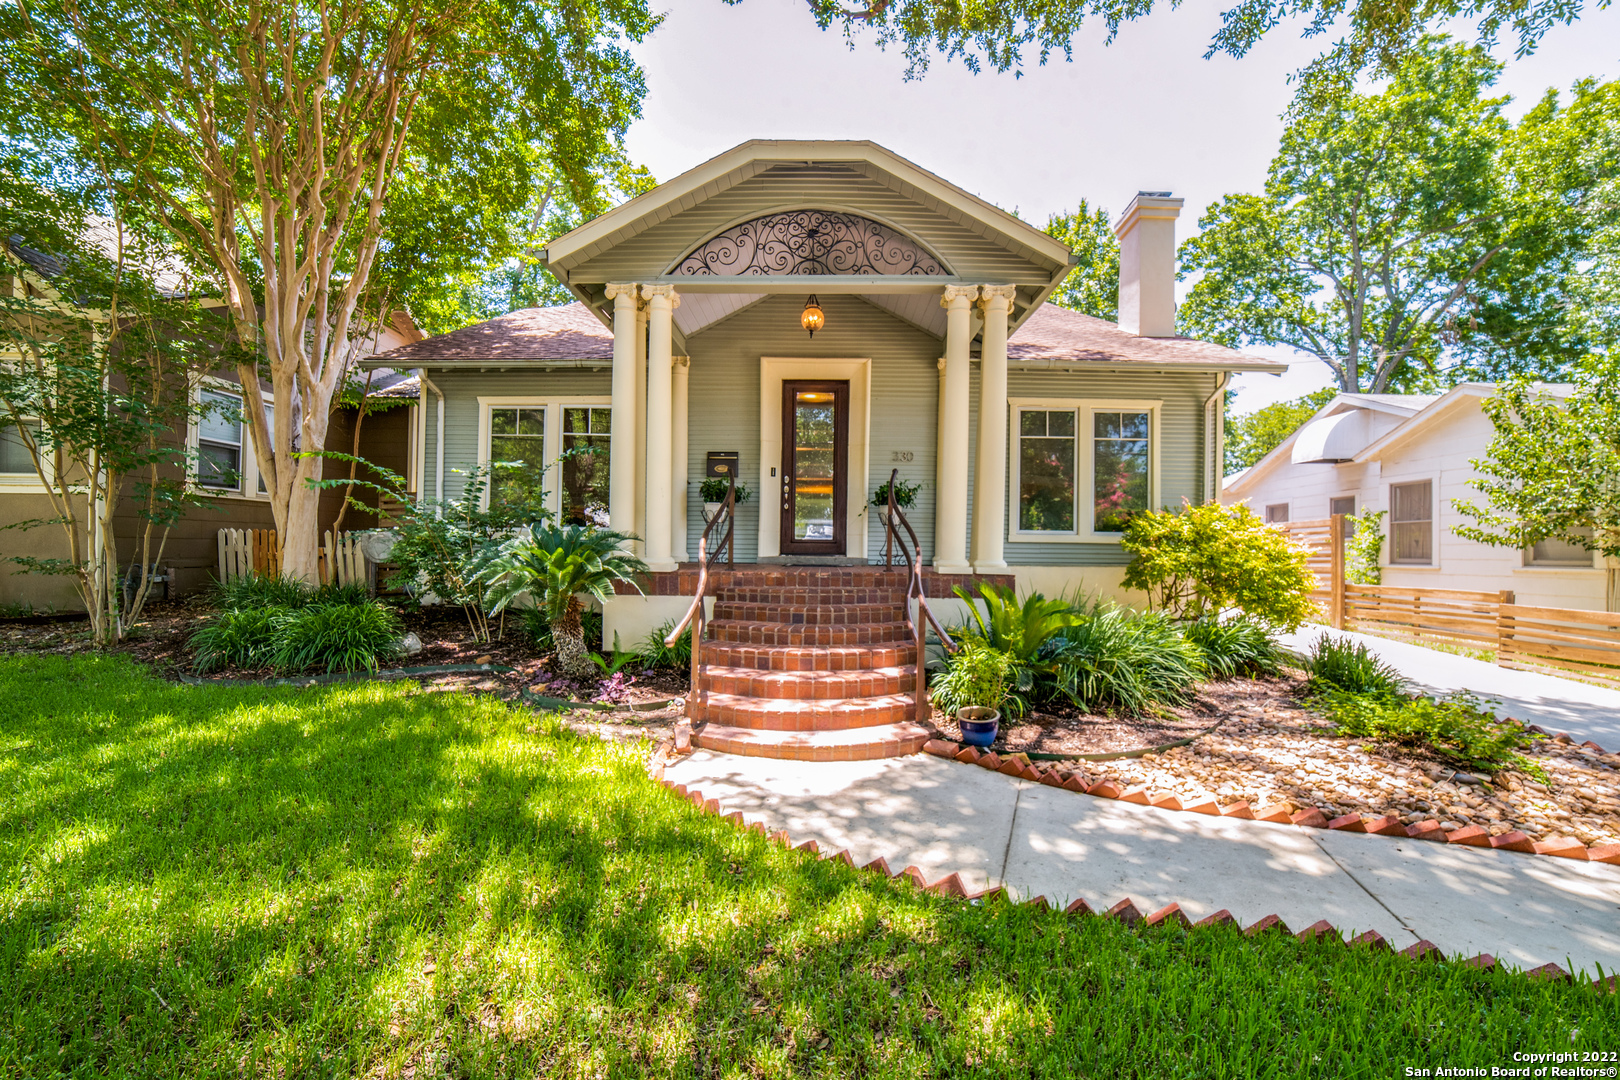 ** OPEN HOUSE Sunday 7/31 2 to 4** Fantastic Alamo Heights location in the Cottage District.   Beautiful historic 4 bedroom home -- or 3+ study w/closet.  Upstairs flexroom, open dining room space between two living areasm beautiful hardwood floors and high end stainless kitchen with breakfast bar and walk in pantry.  Spa style owners bath with travertine walk in shower. Patio off LR & master with balcony off second bedroom overlooking backyard of mature trees. Parking pad in the back leading to detatched garage. 2 AC units, #1 is one year old, #2 is 5 years old, water heater is 1 year old, new outside paint 2 years ago. Short walk to elementary school, pool, and park!